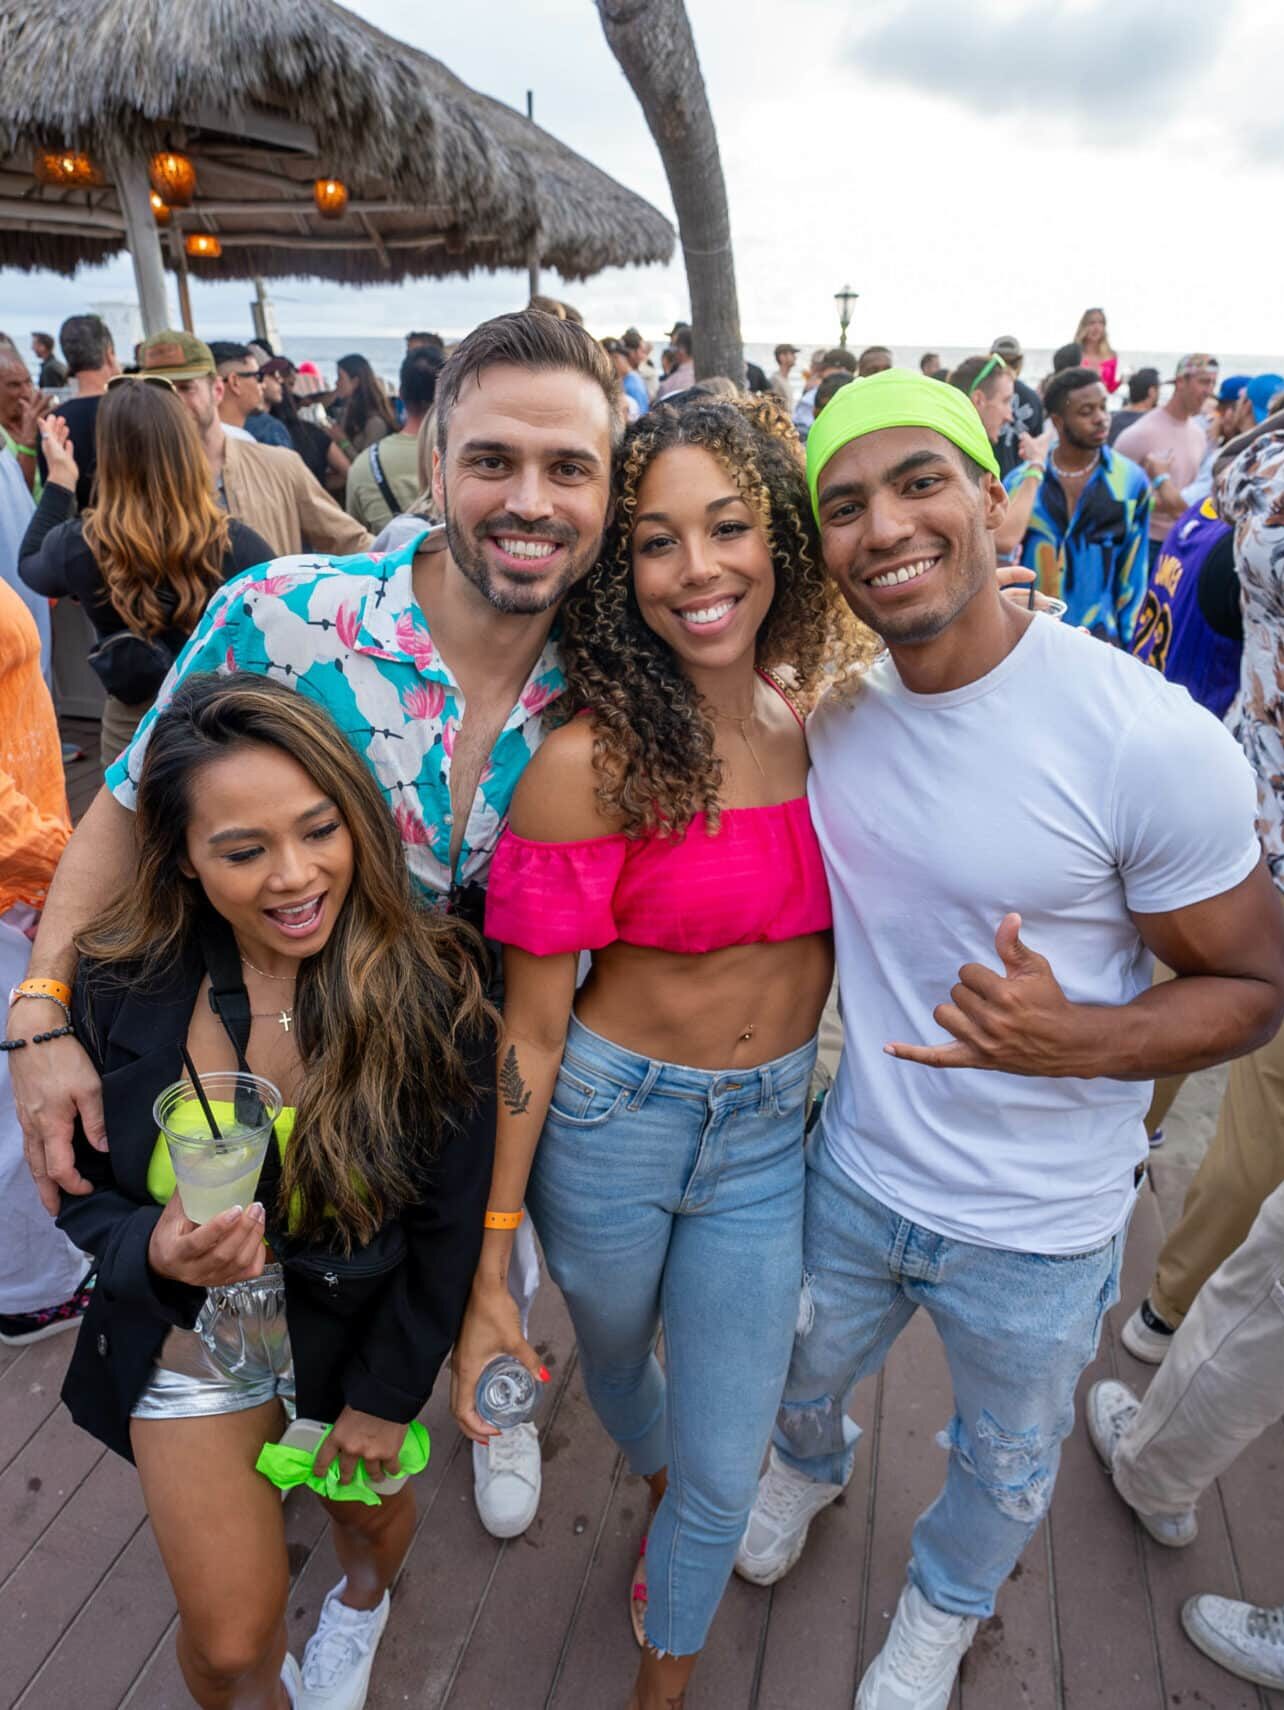 A group of people posing for a photo at a beach party.